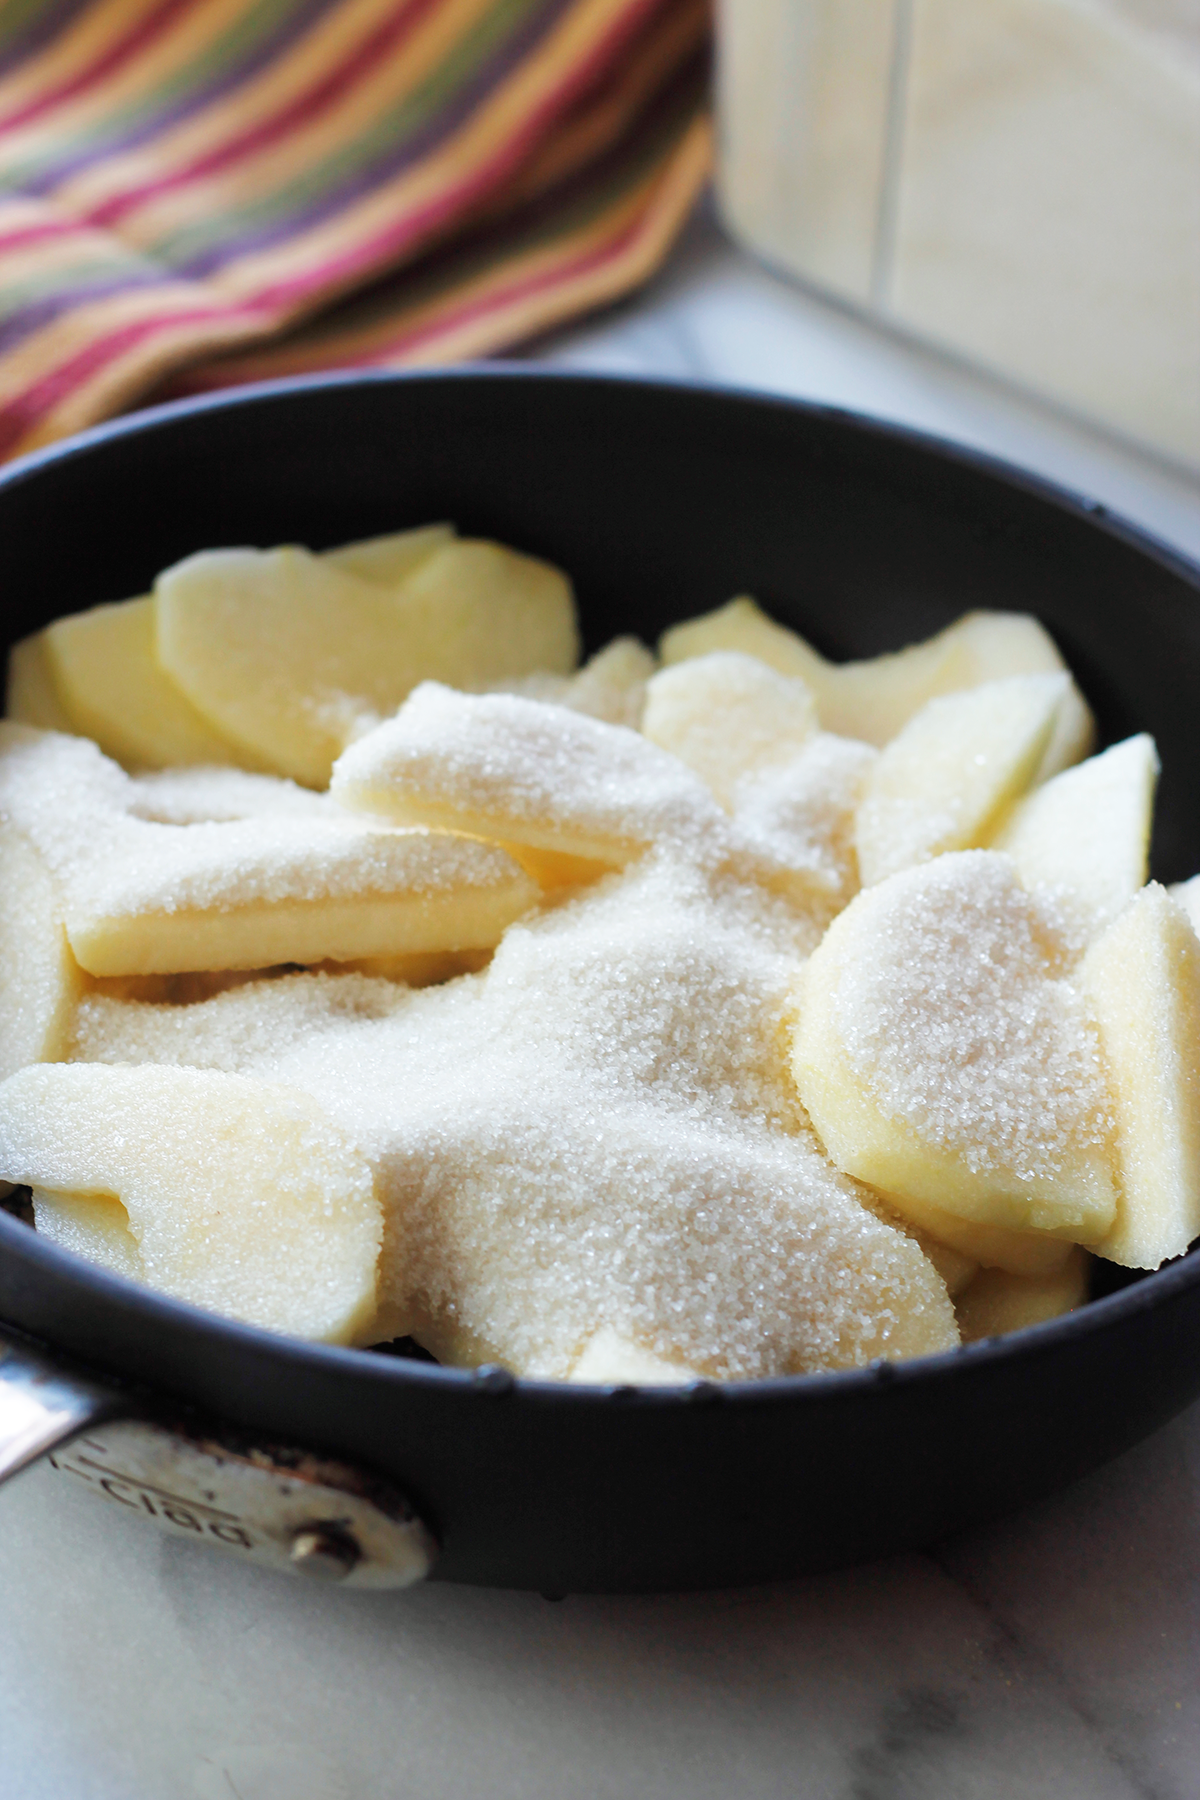 Pan filled with sliced apples covered in sugar and a striped kitchen towel in the background.